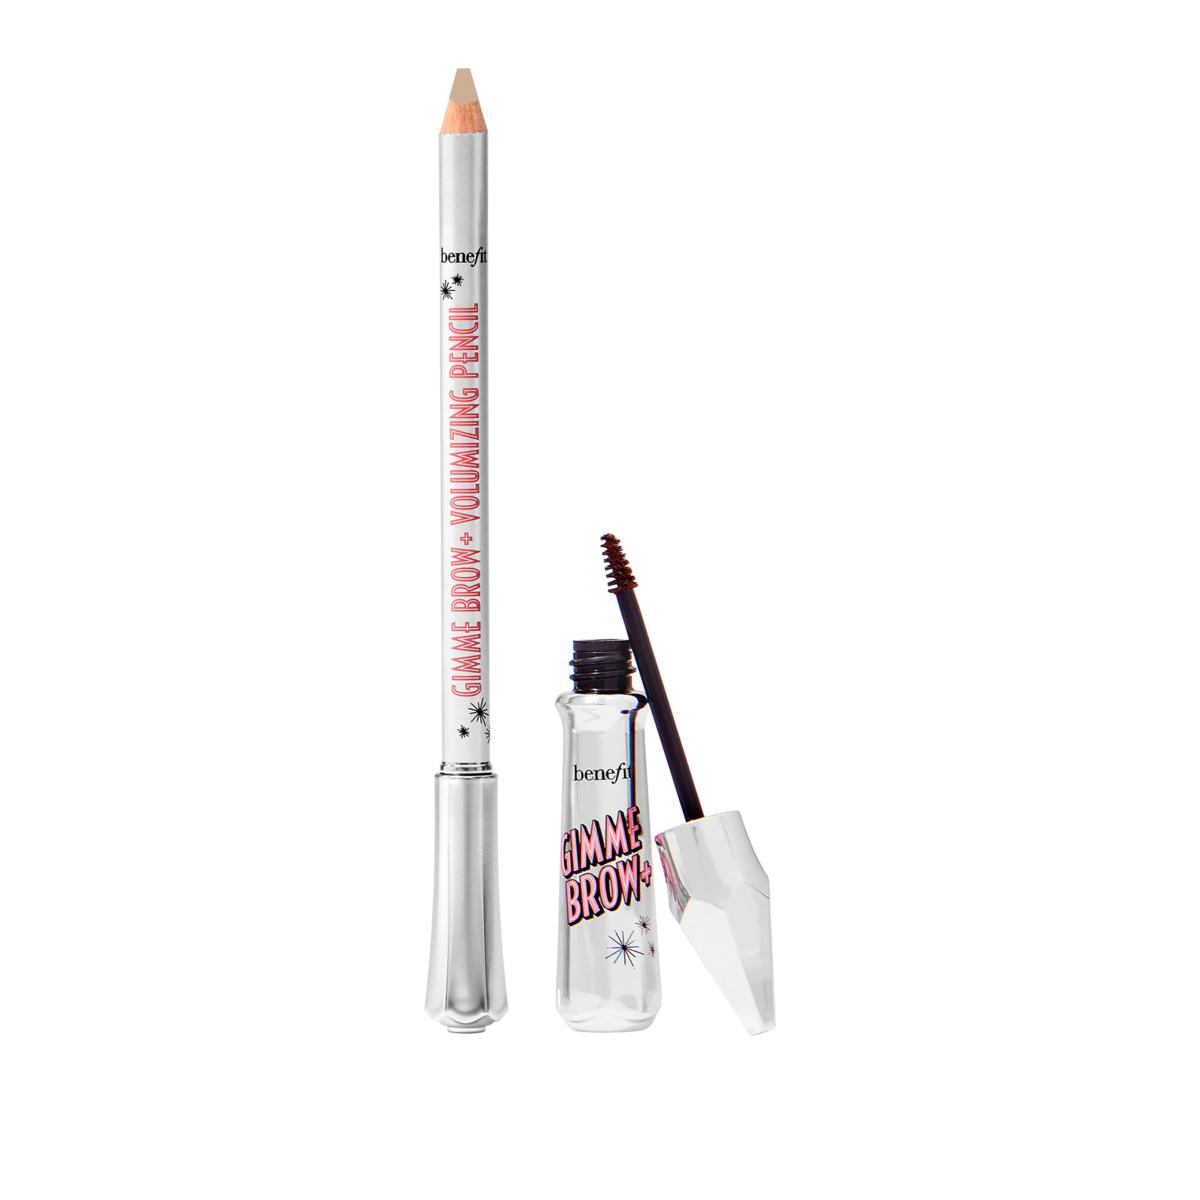 Benefit Gimme, Gimme Brows Brow Gel and Pencil Value Set - 20919488